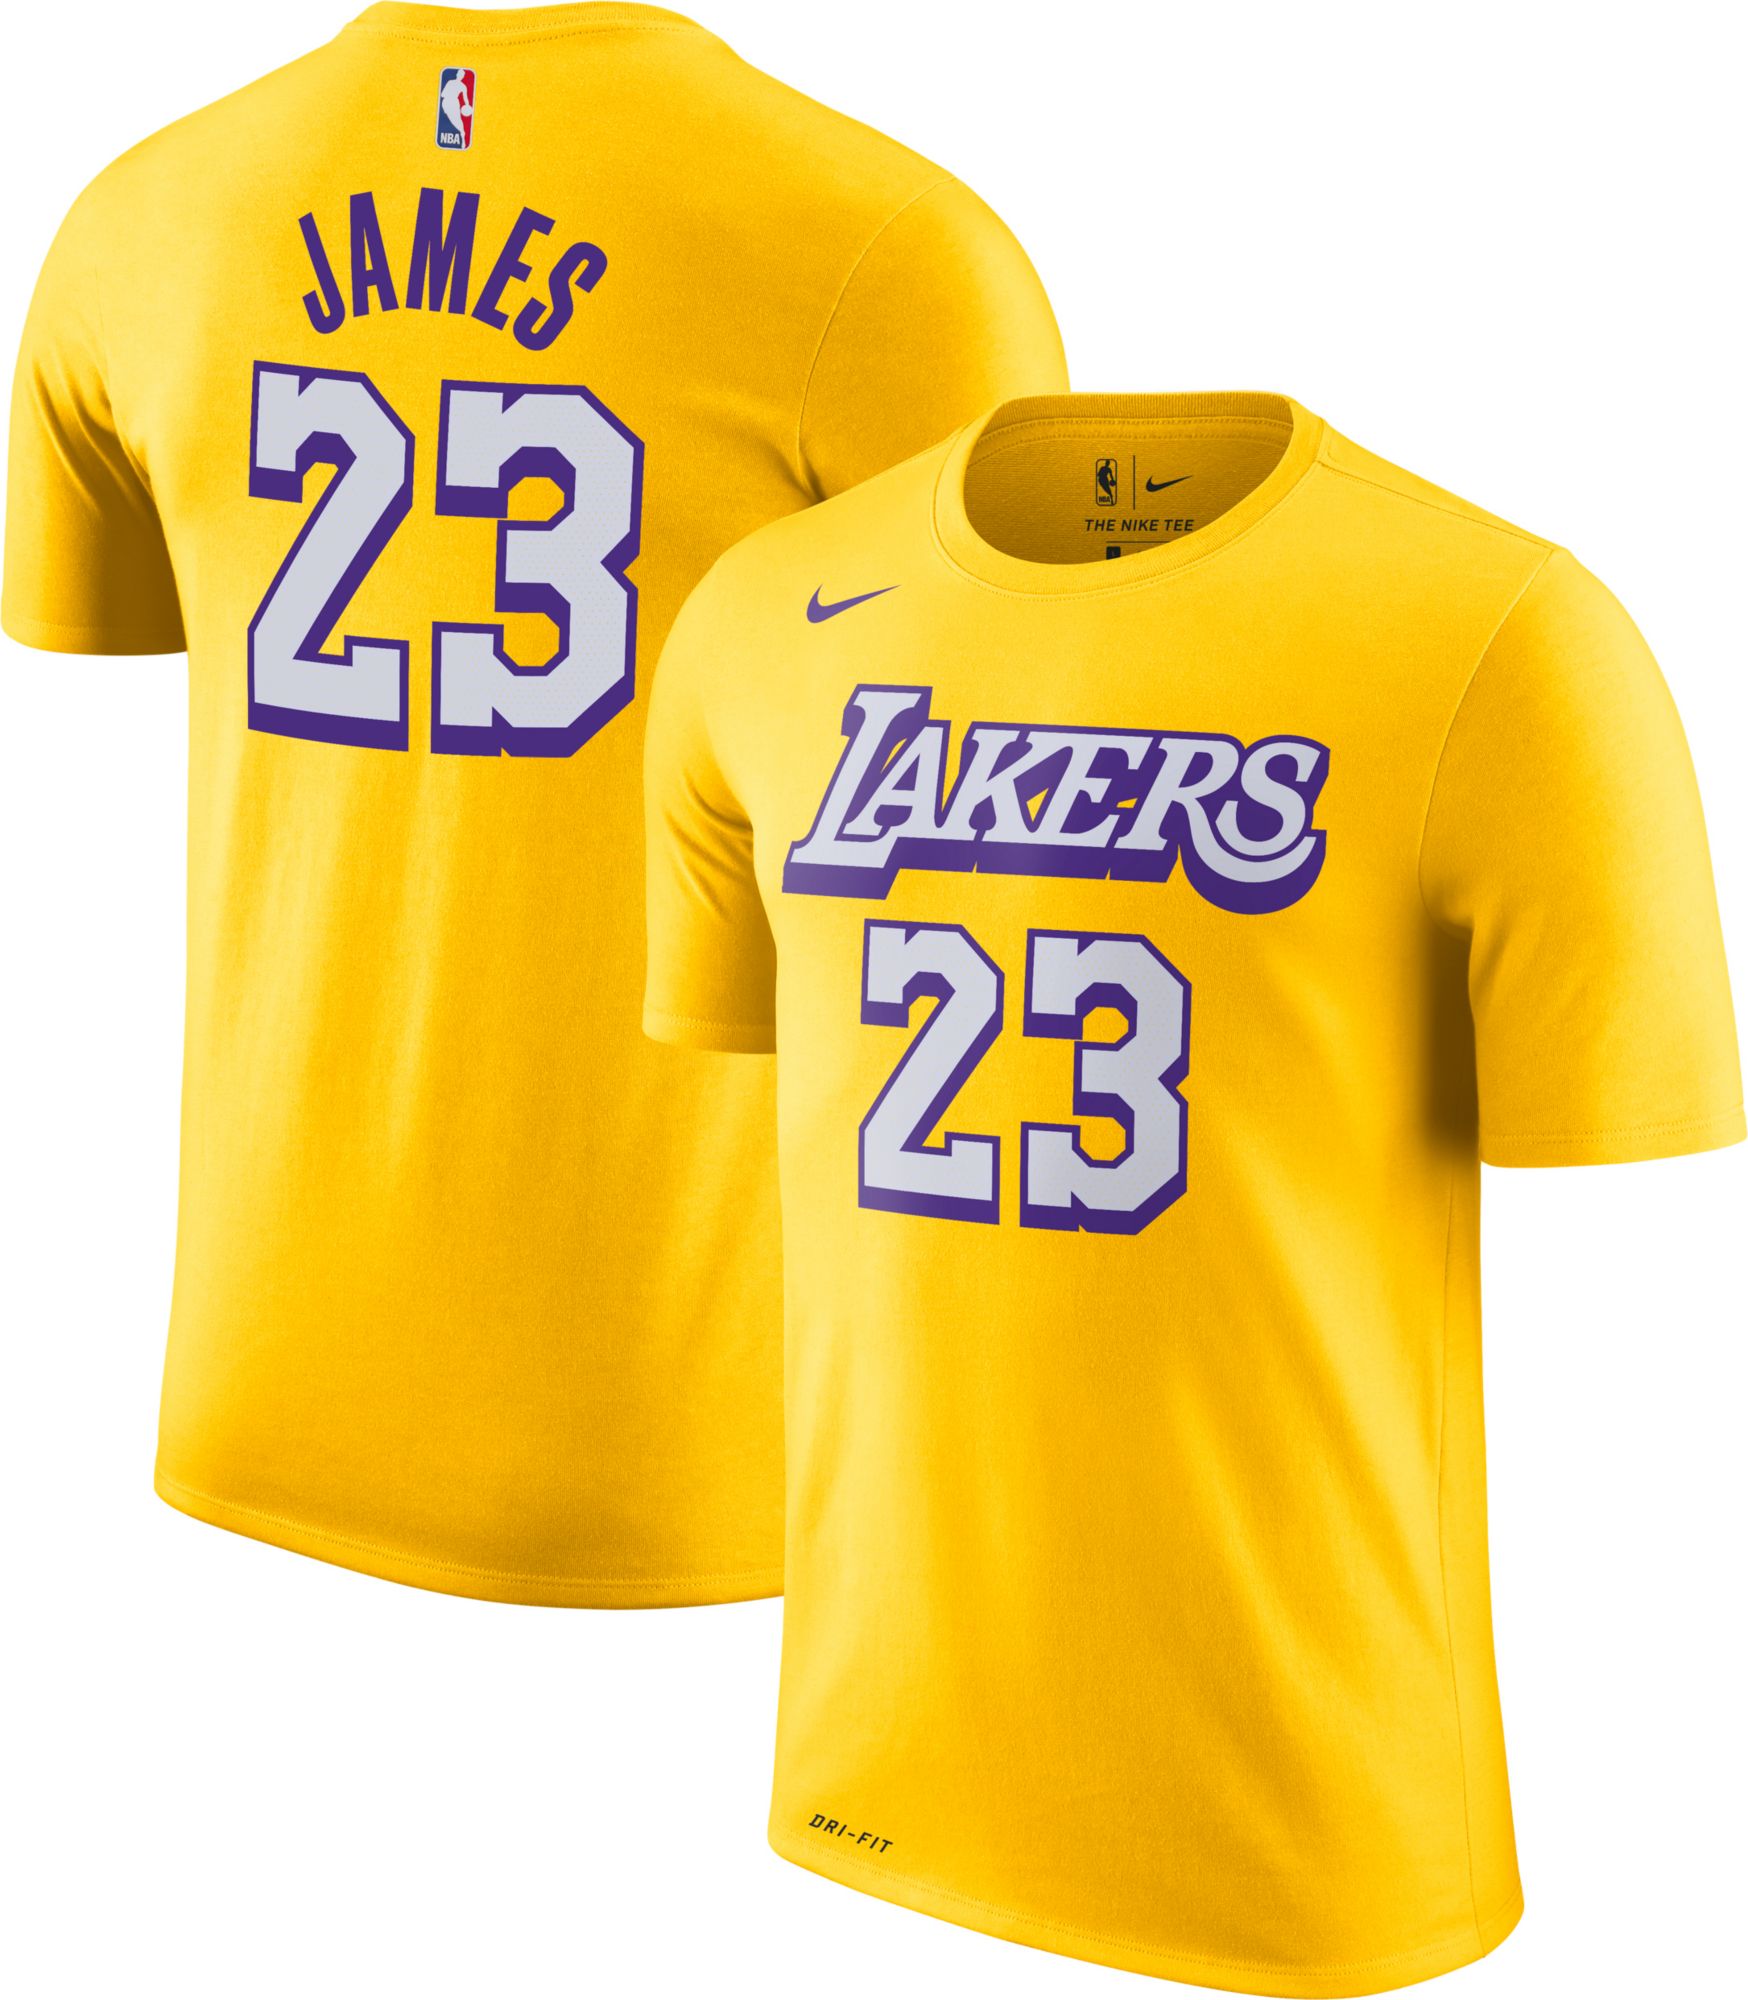 lakers lebron city edition